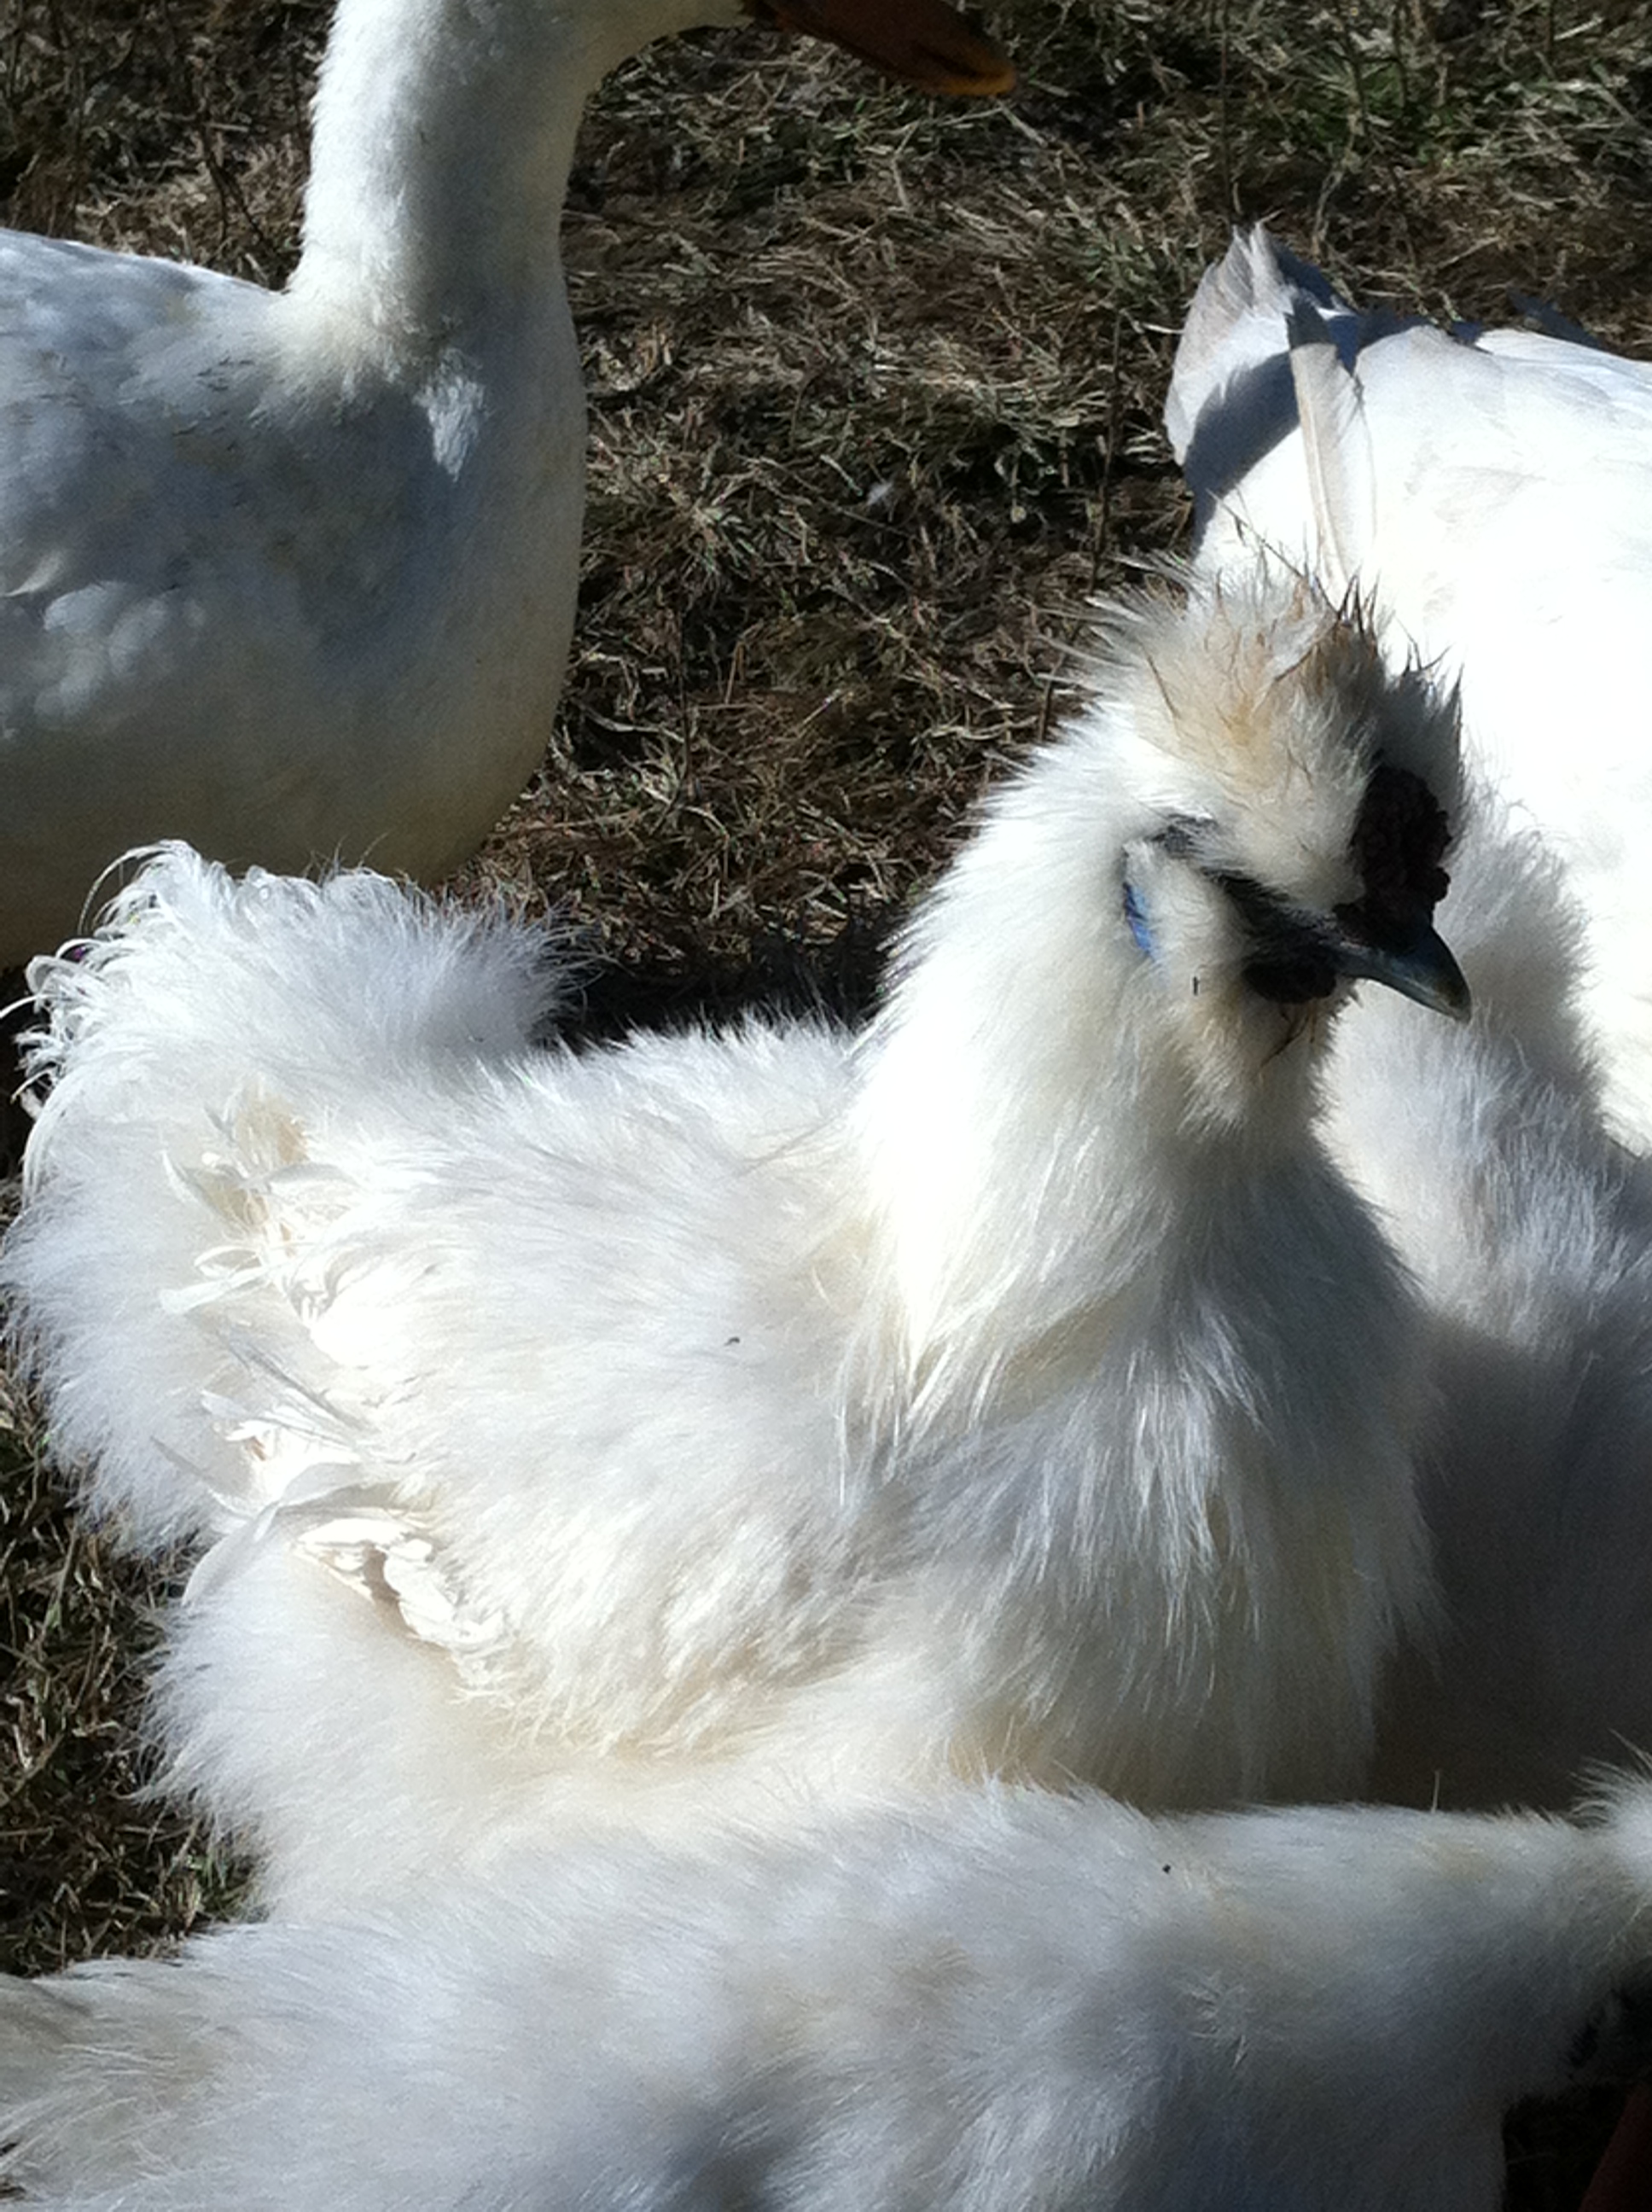 This is my young White silkie roo. He's super sweet and takes very good care of his hens.